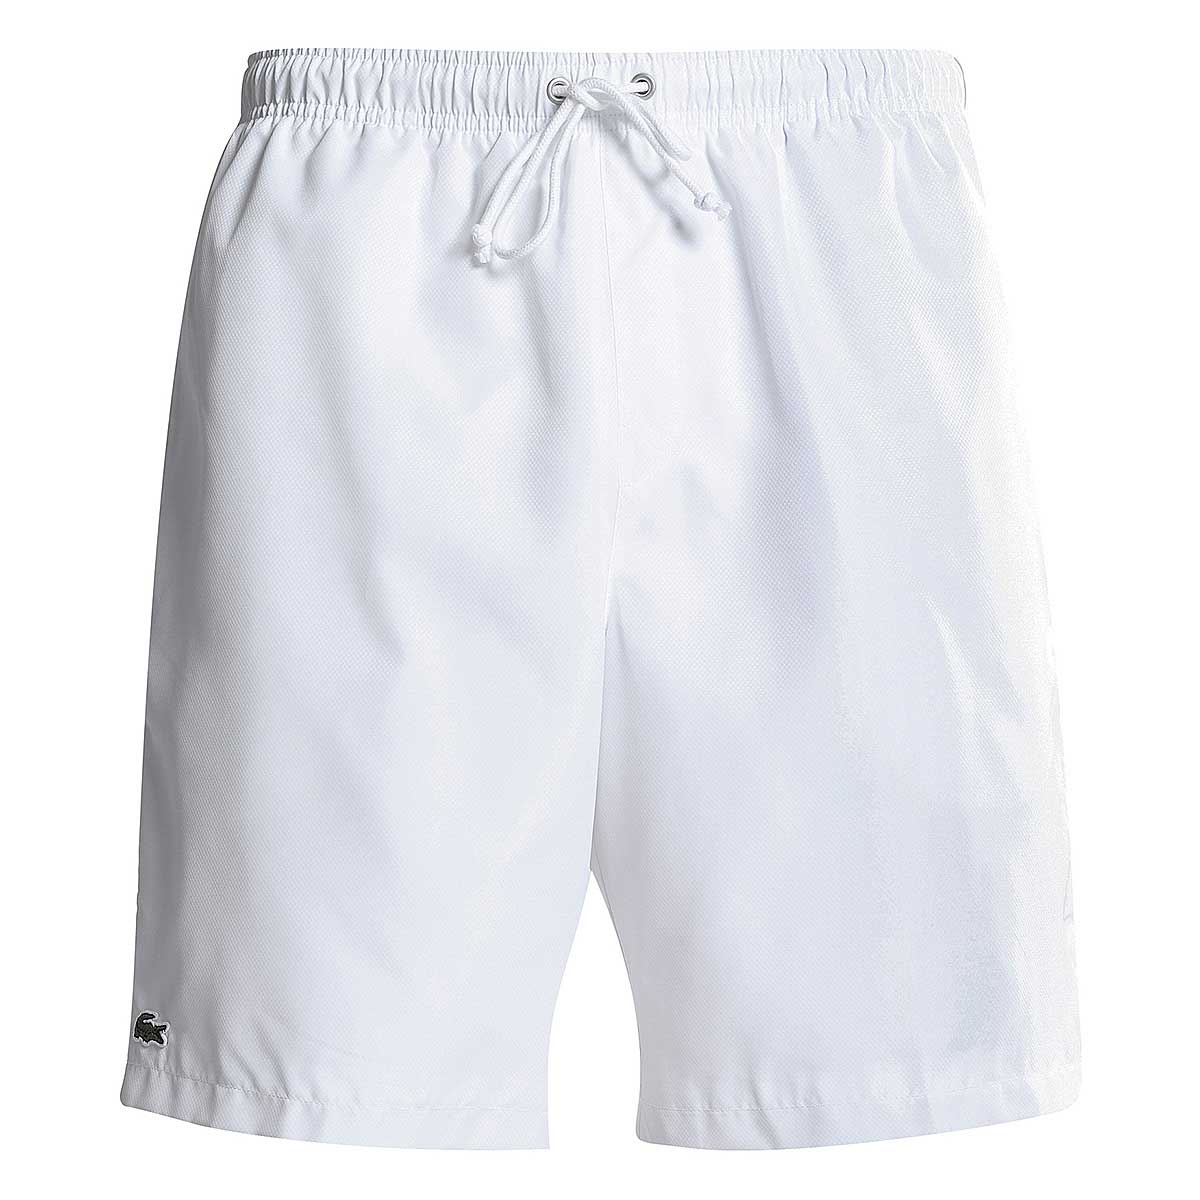 Lacoste Gh353T Small Weave Croc Shorts, White